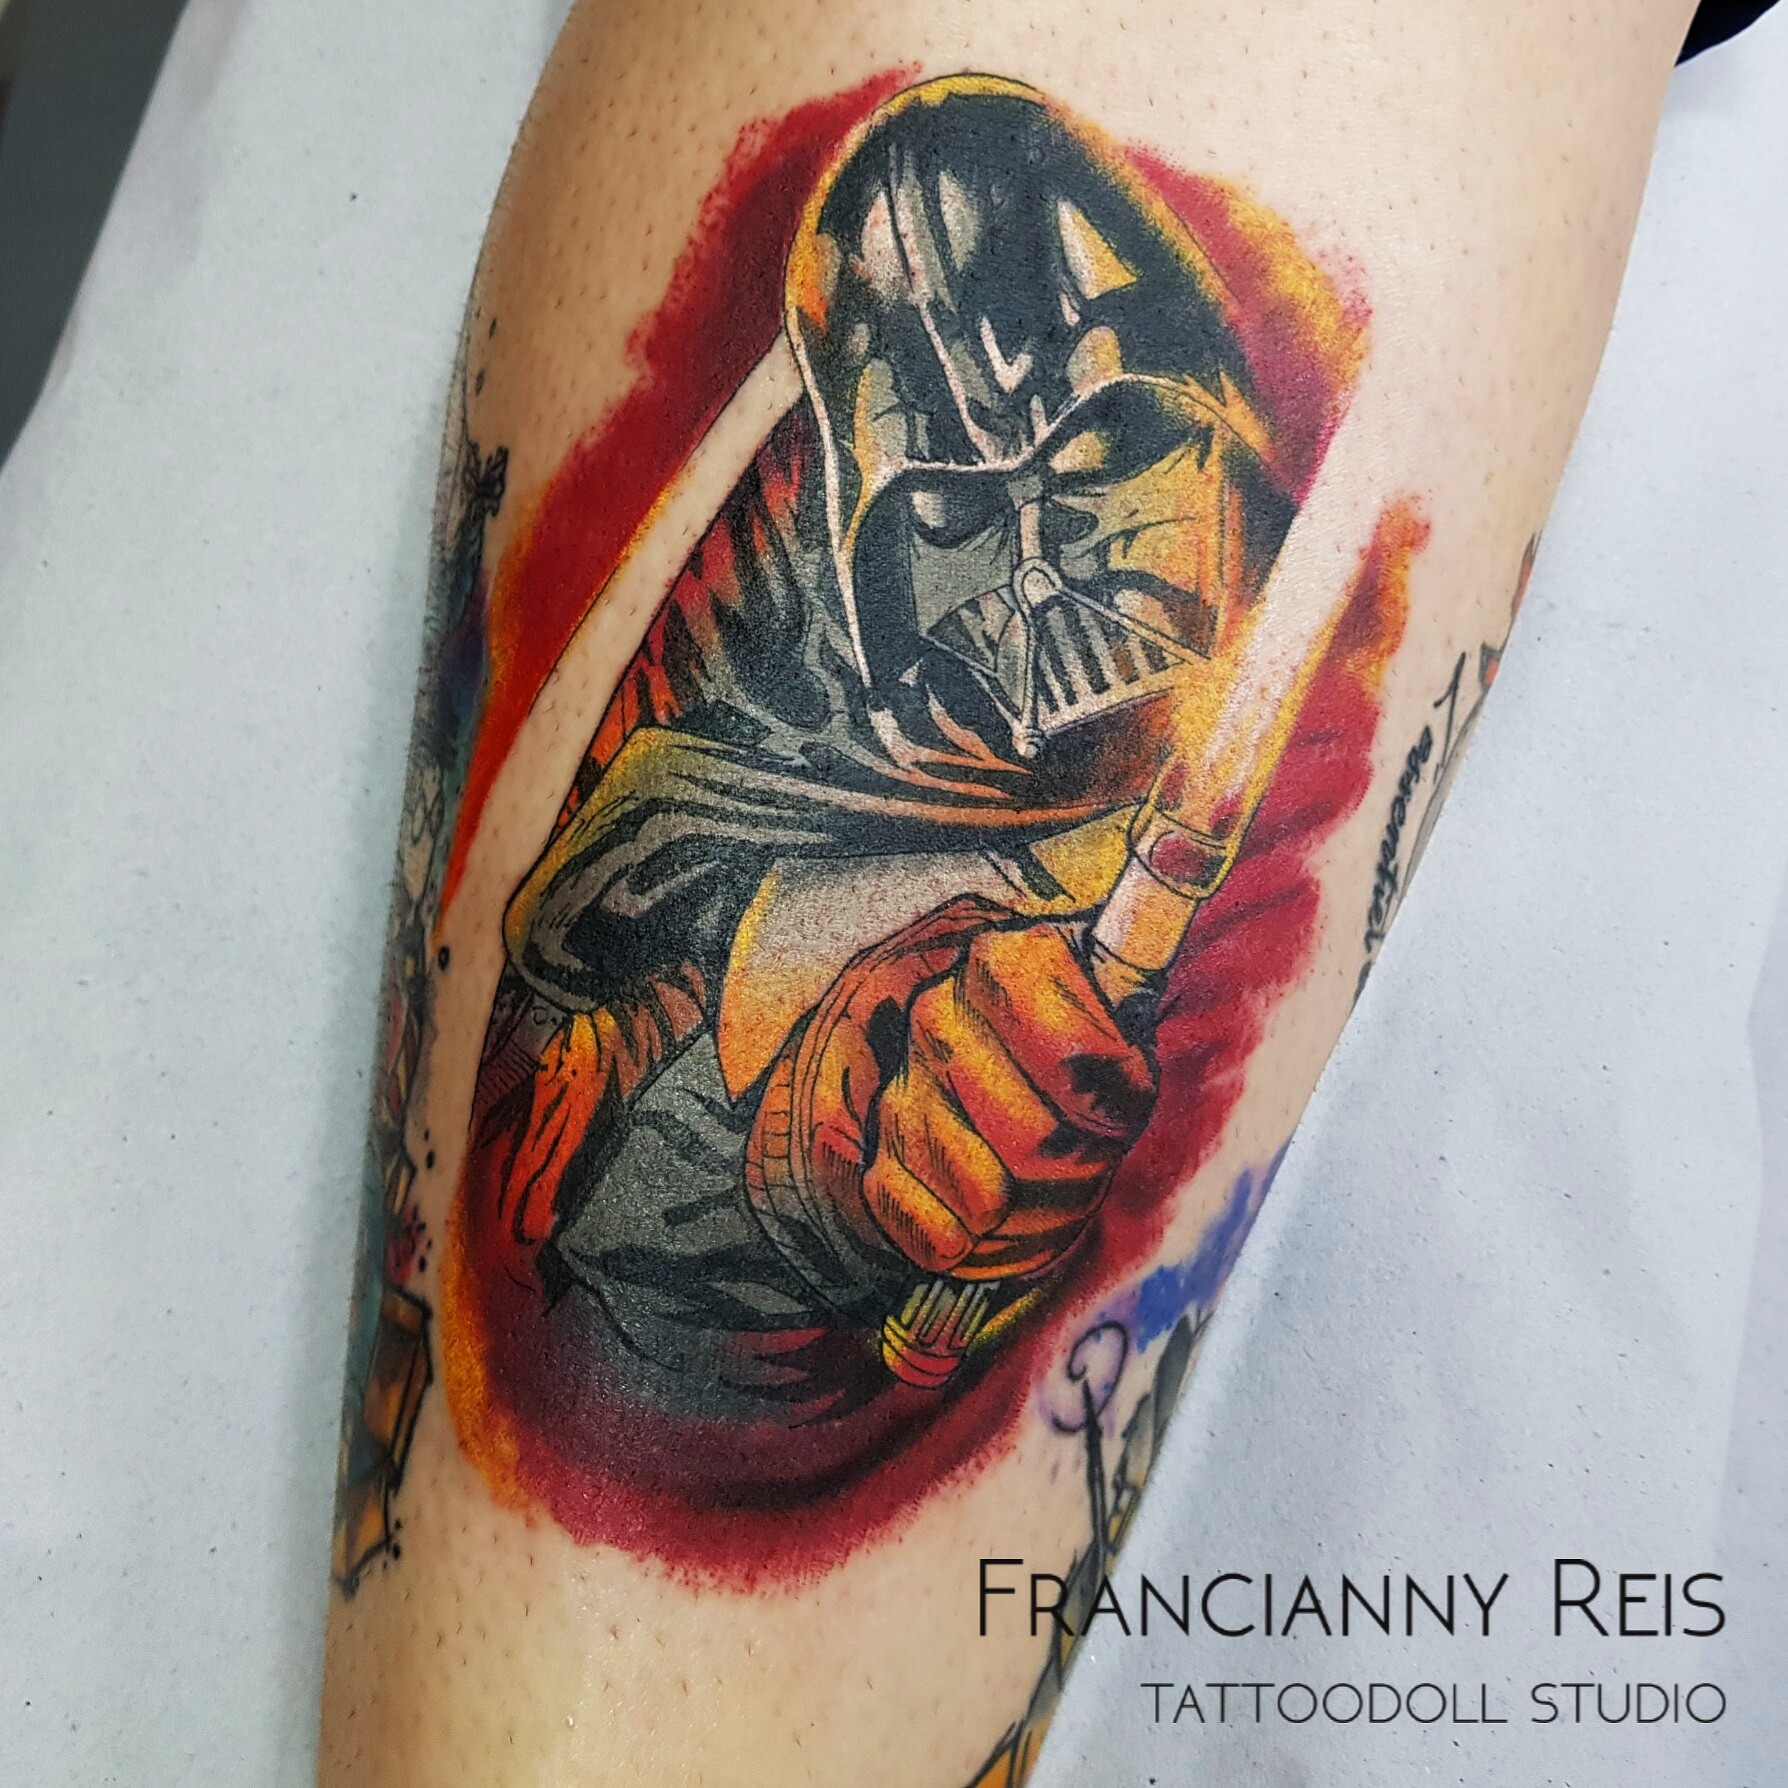 Star Wars Tattoos for Men  Best Designs and Ideas for Guys